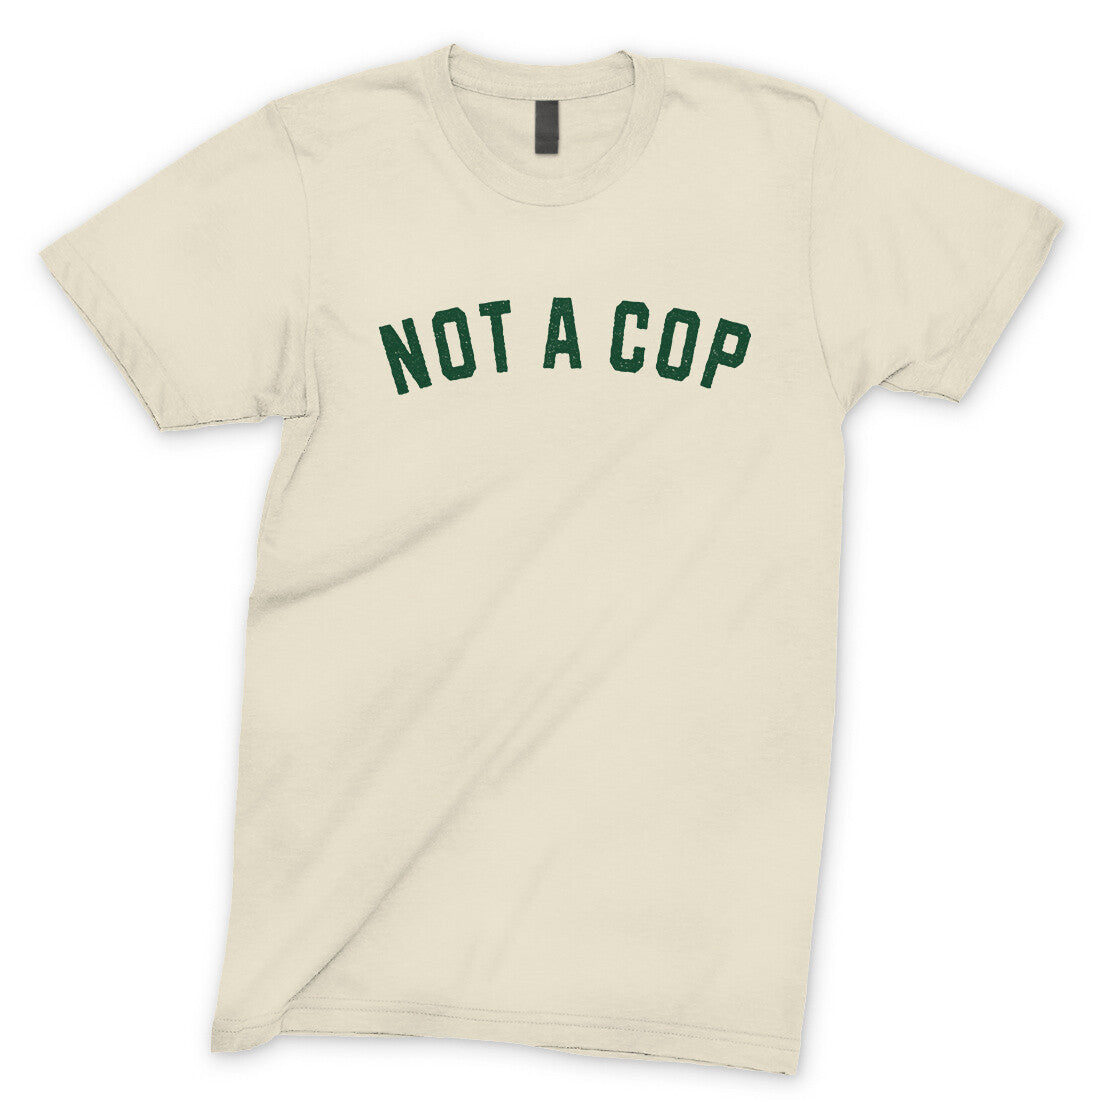 Not a Cop in Natural Color